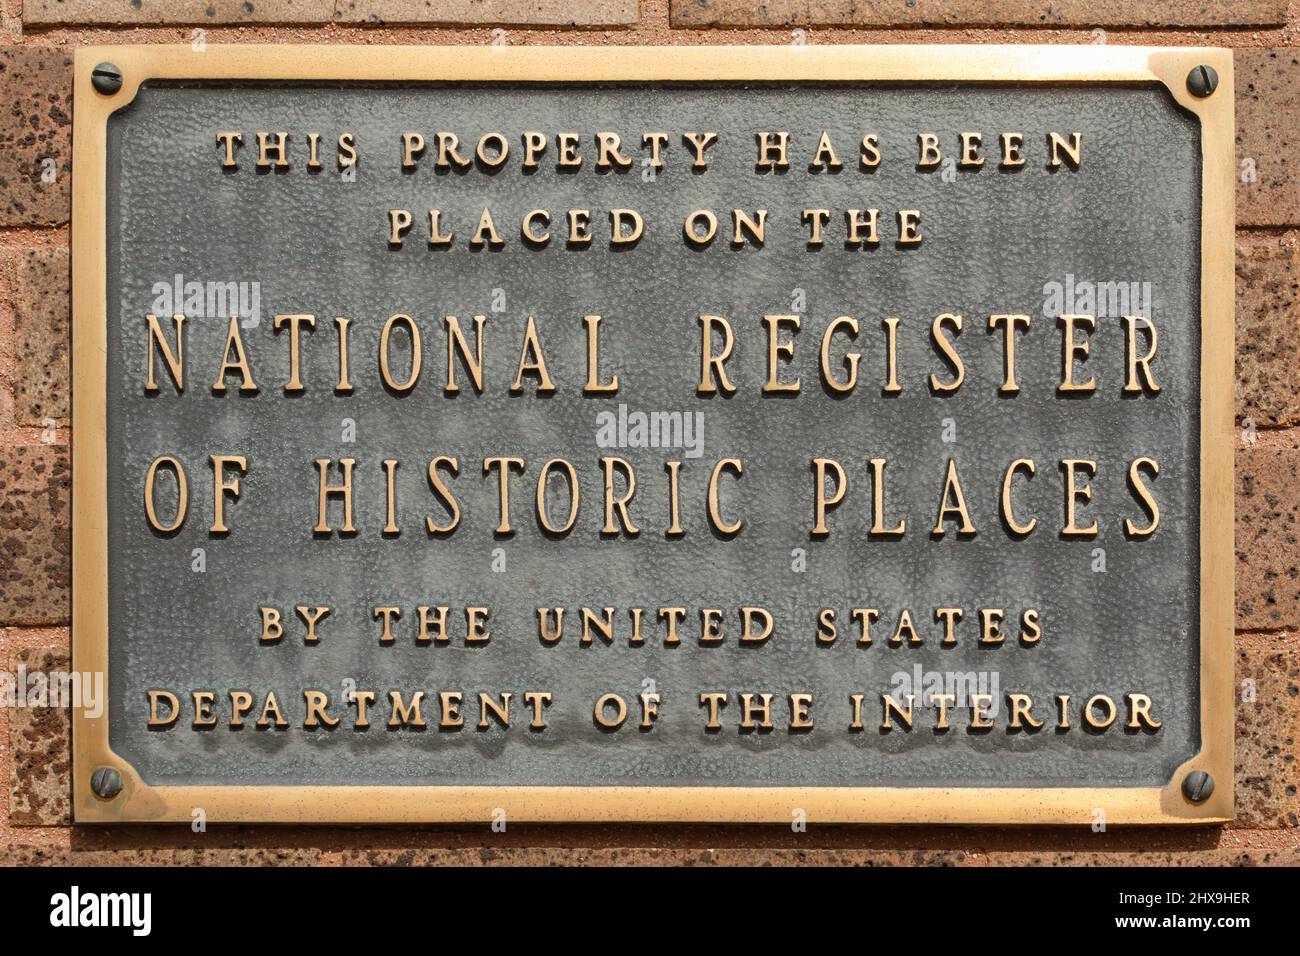 Plaque for National Register Of Historic Places. This Property has Been Placed On The National Registry Of Historic Places By The United States Depart Stock Photo